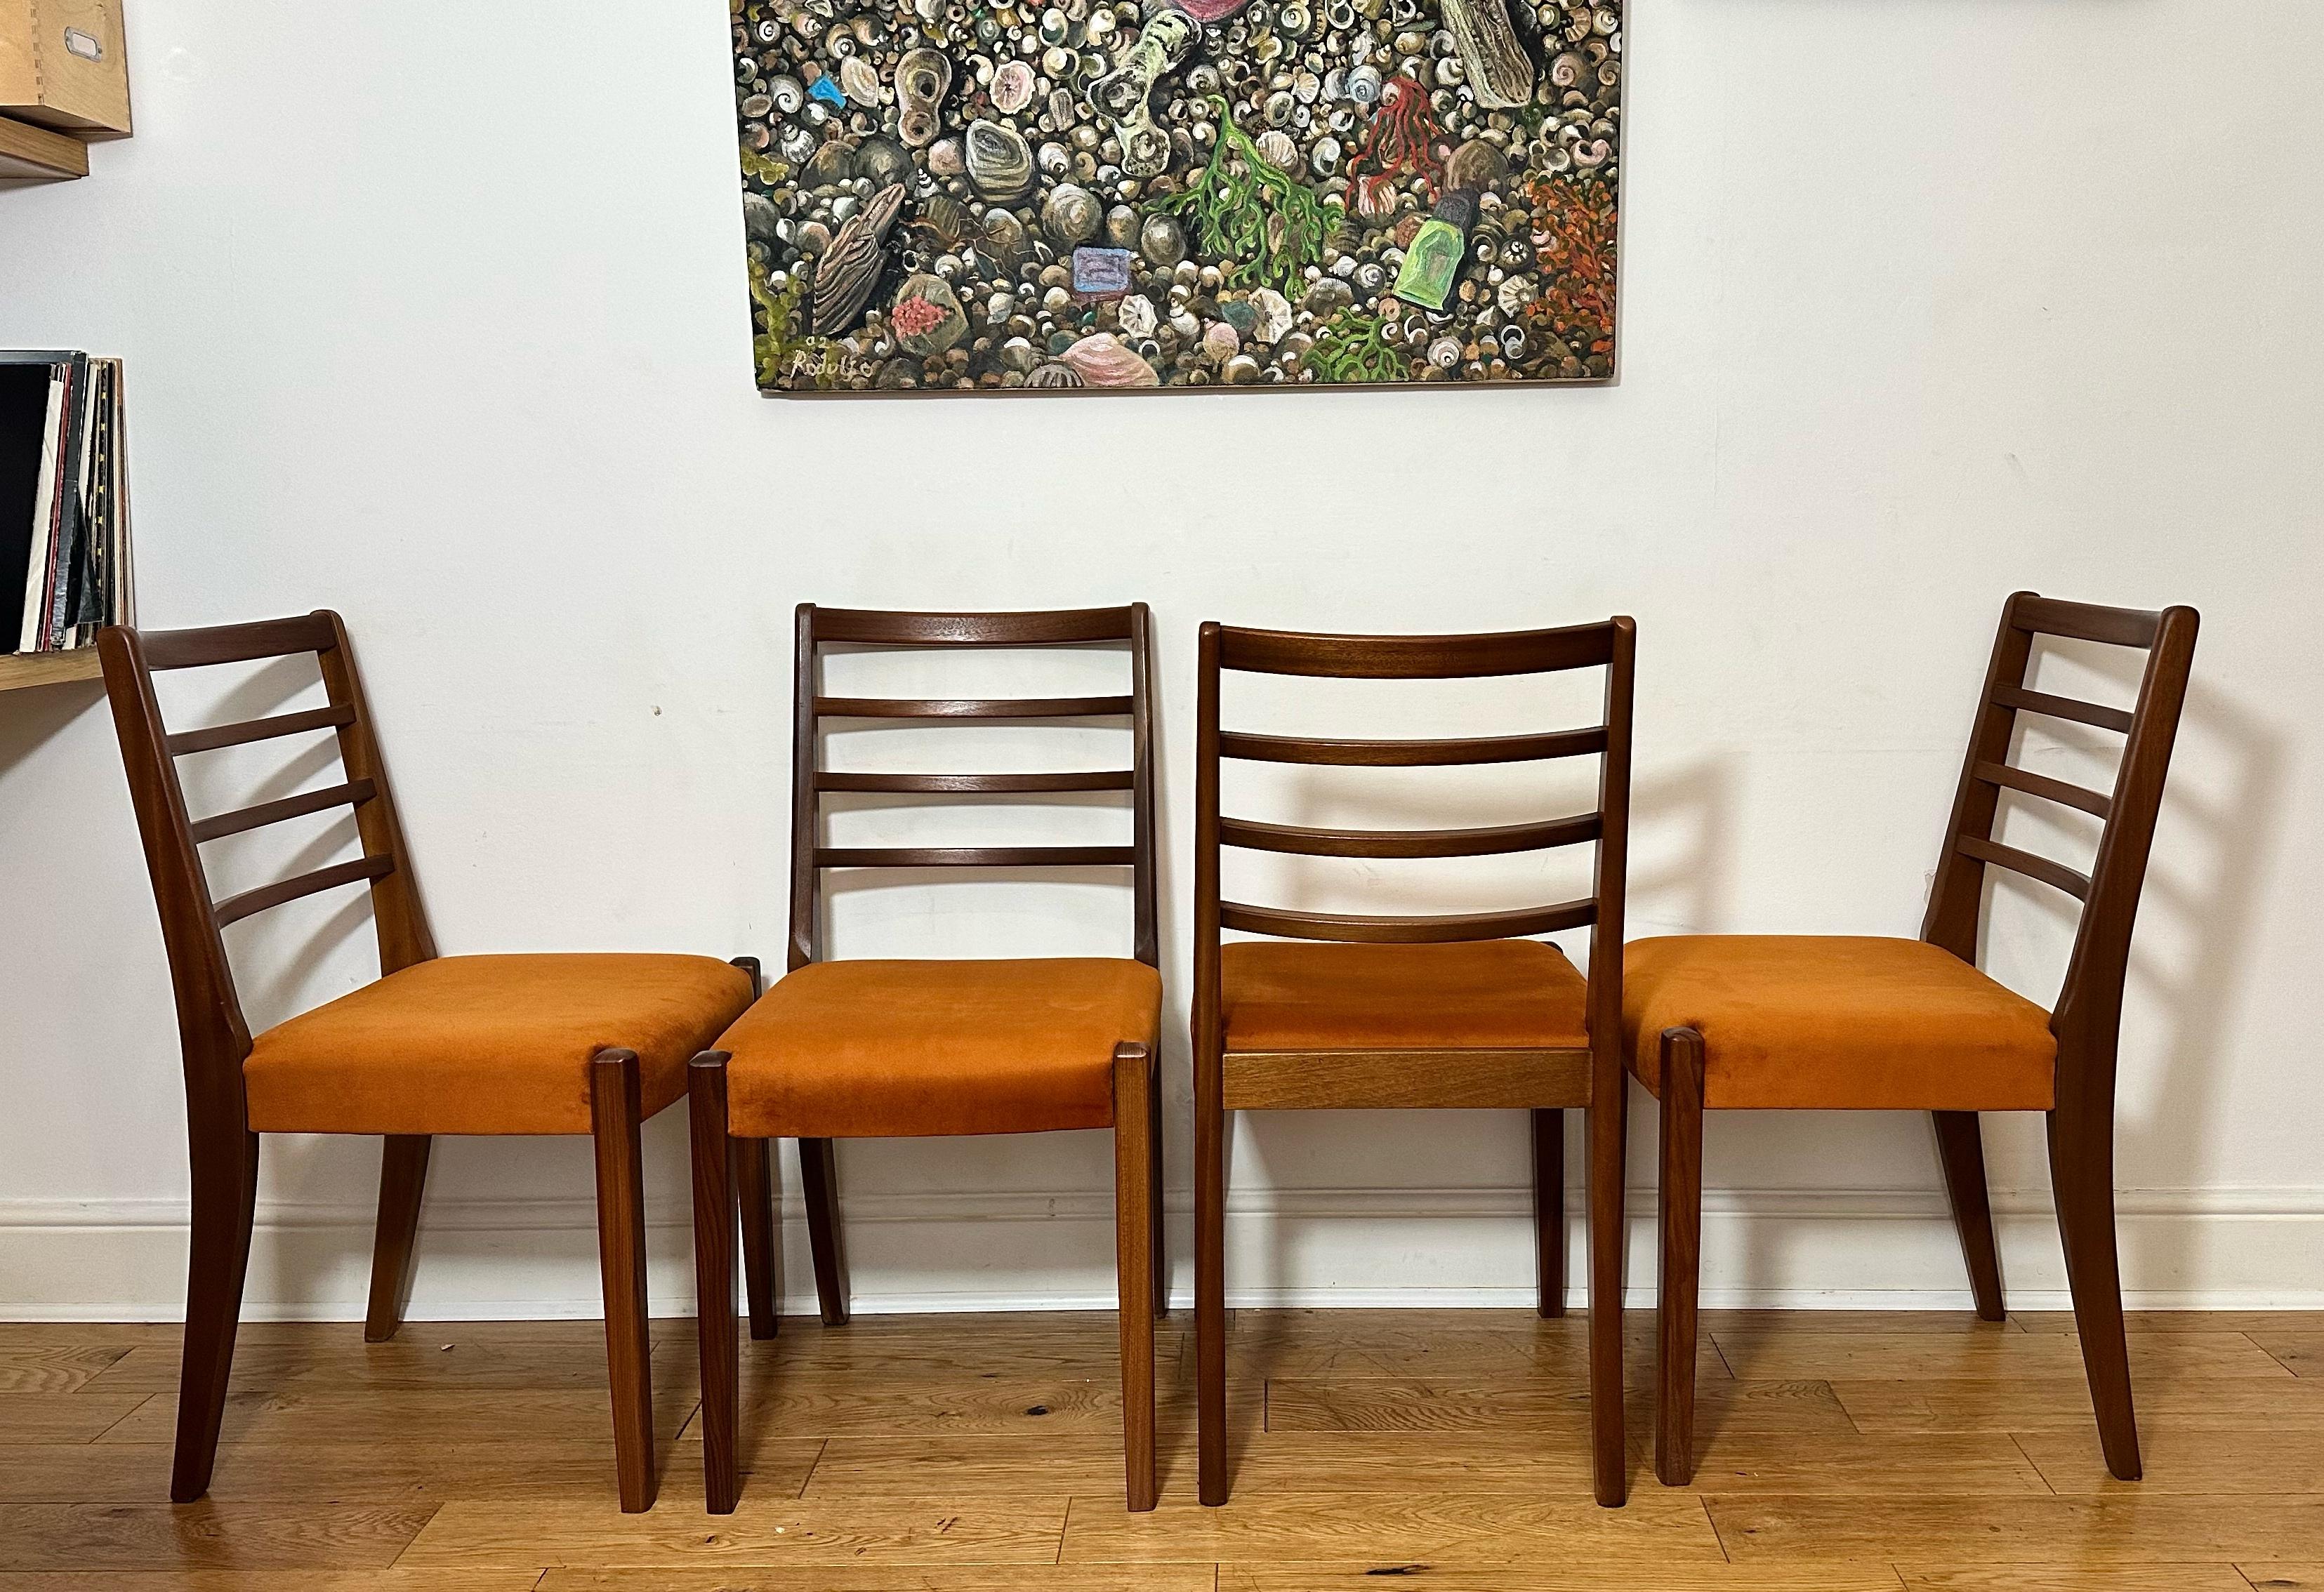 We’re happy to provide our own competitive shipping quotes with trusted couriers. Please message us with your postcode for a more accurate price. Thank you.

Beautiful, top quality mid-century set of six ladder back Danish chairs. Very stylish